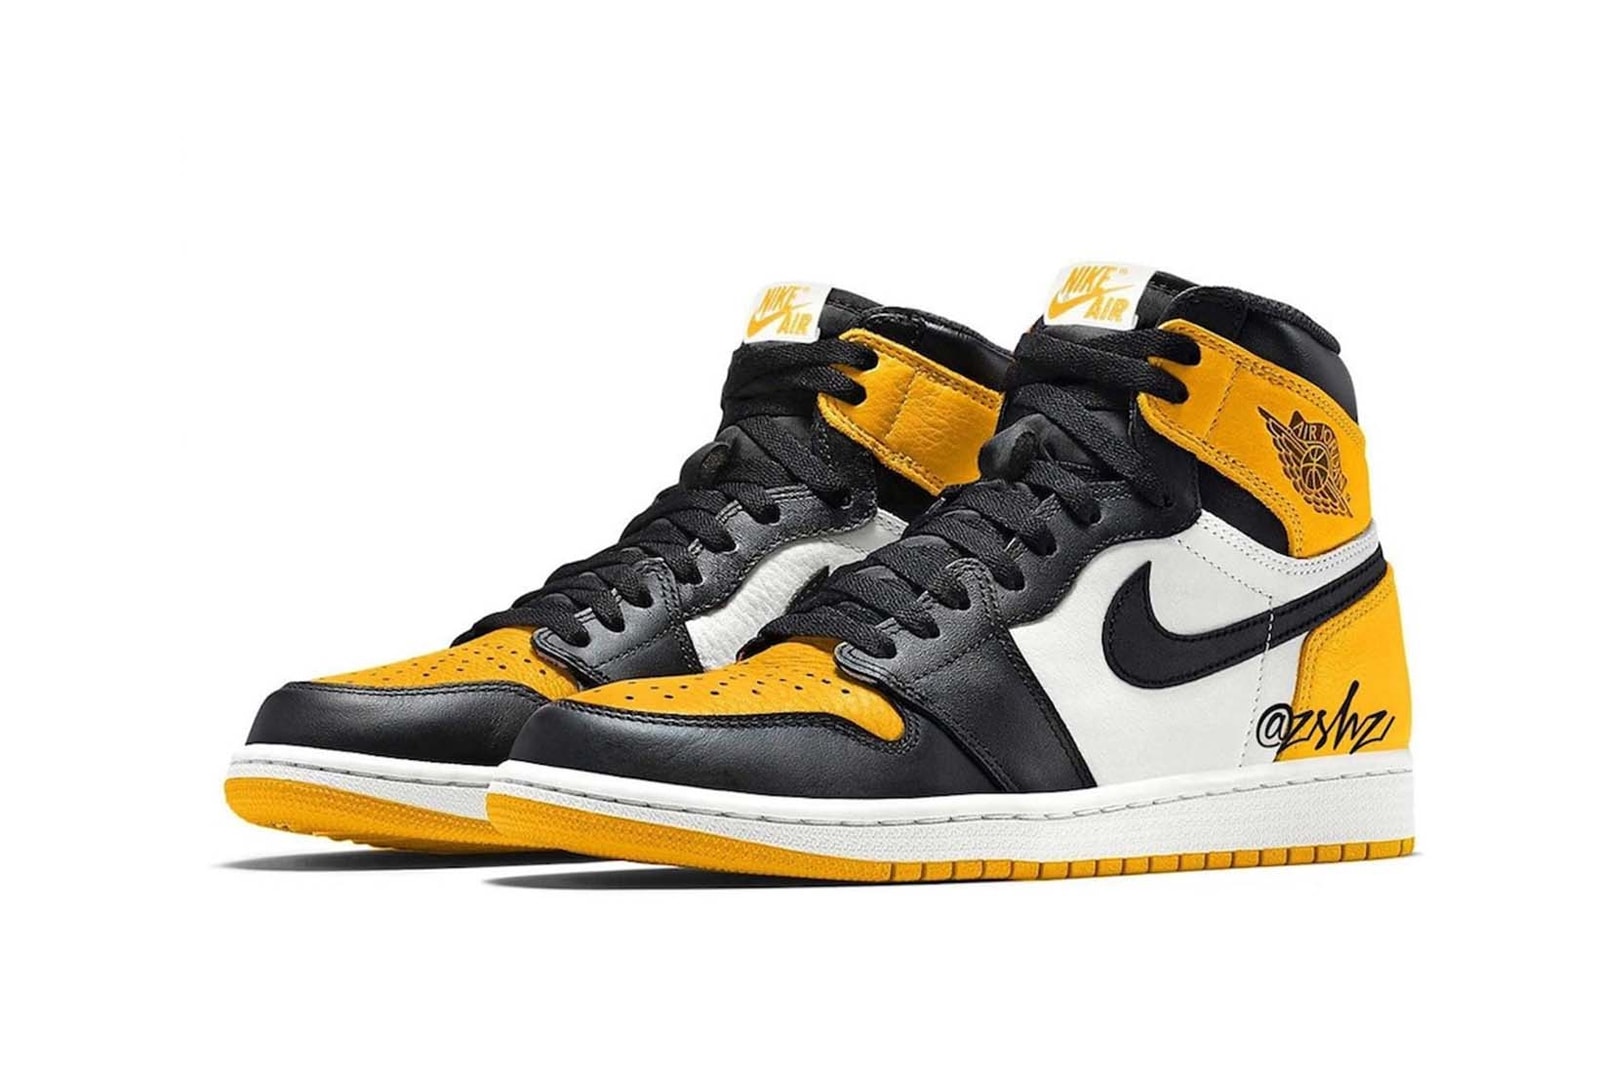 Nike Air Jordan Fall 2022 Collection Yellow Toe Black White High OG Price Release Date Collaboration